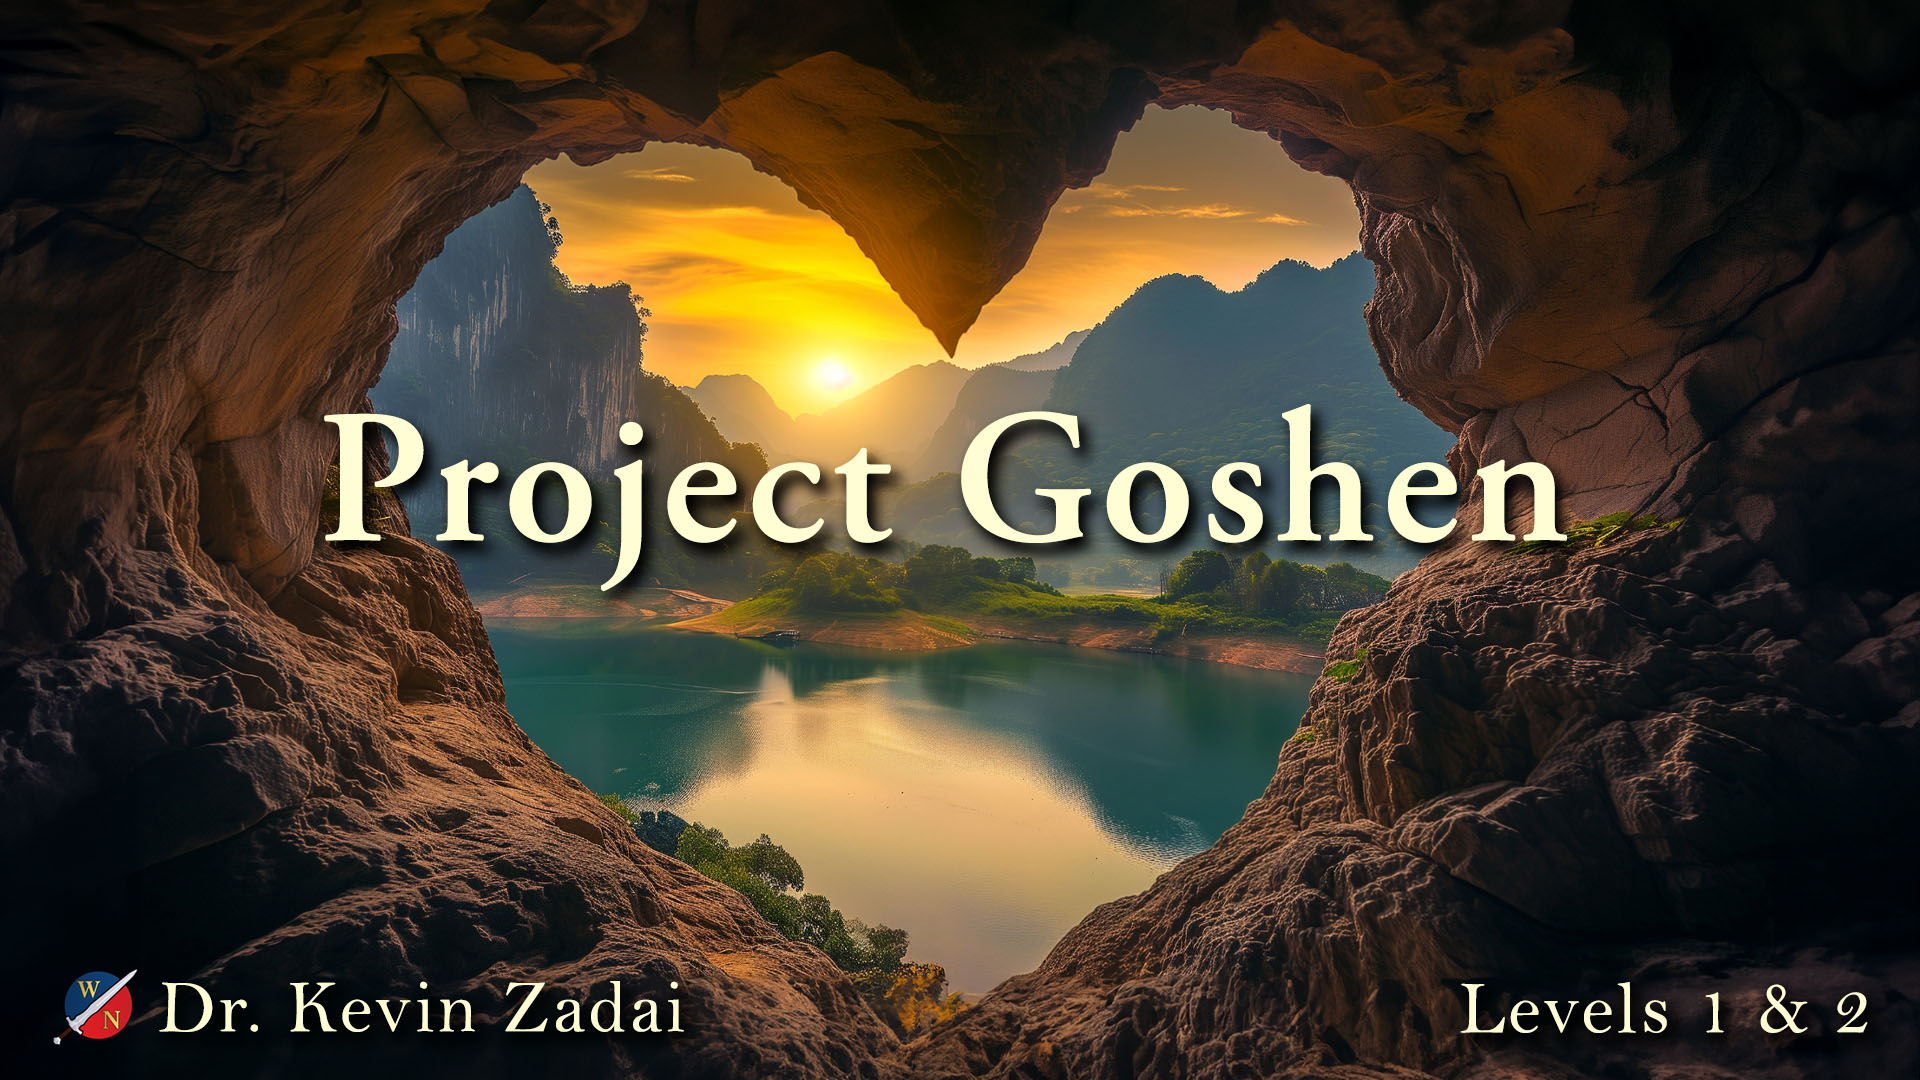 Project Goshen Bundle with Dr. Kevin Zadai